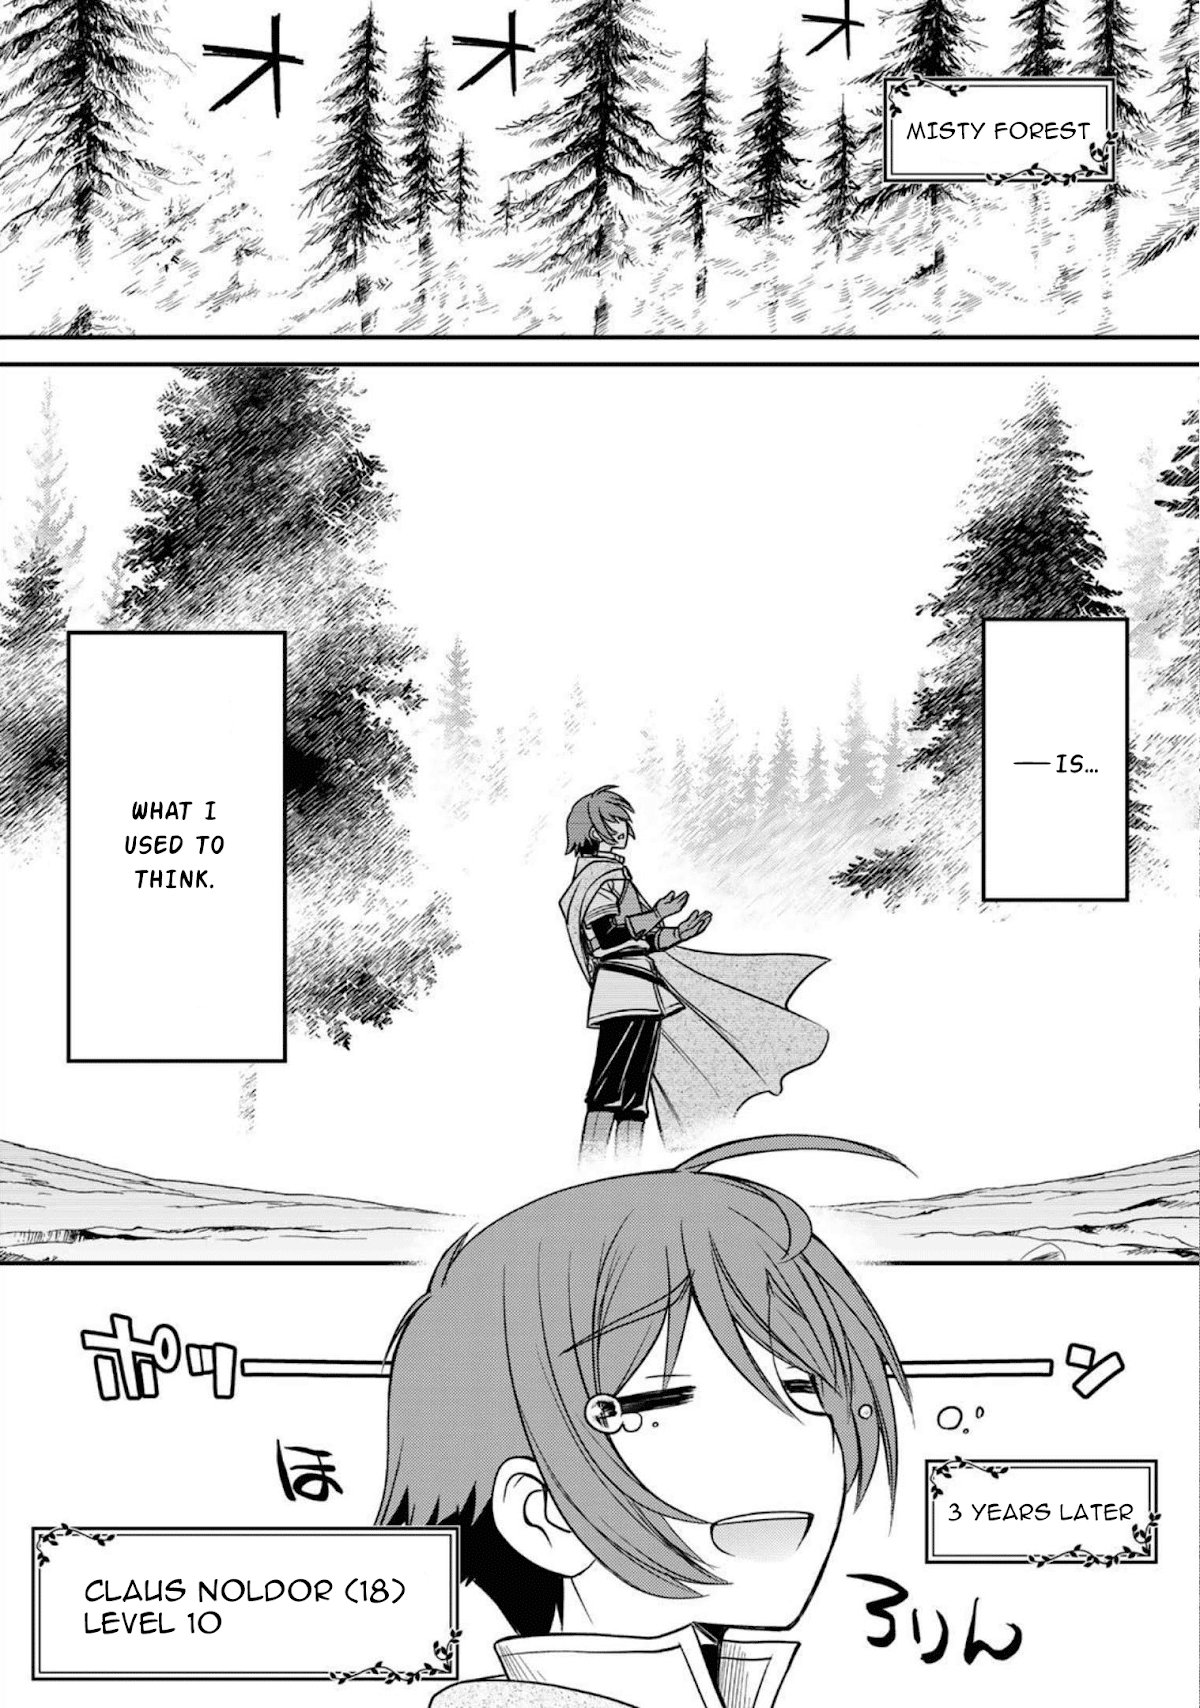 The Useless Skill [Auto Mode] Has Been Awakened ~Huh, Guild's Scout, Didn't You Say I Wasn't Needed Anymore?~ chapter 1 - page 4